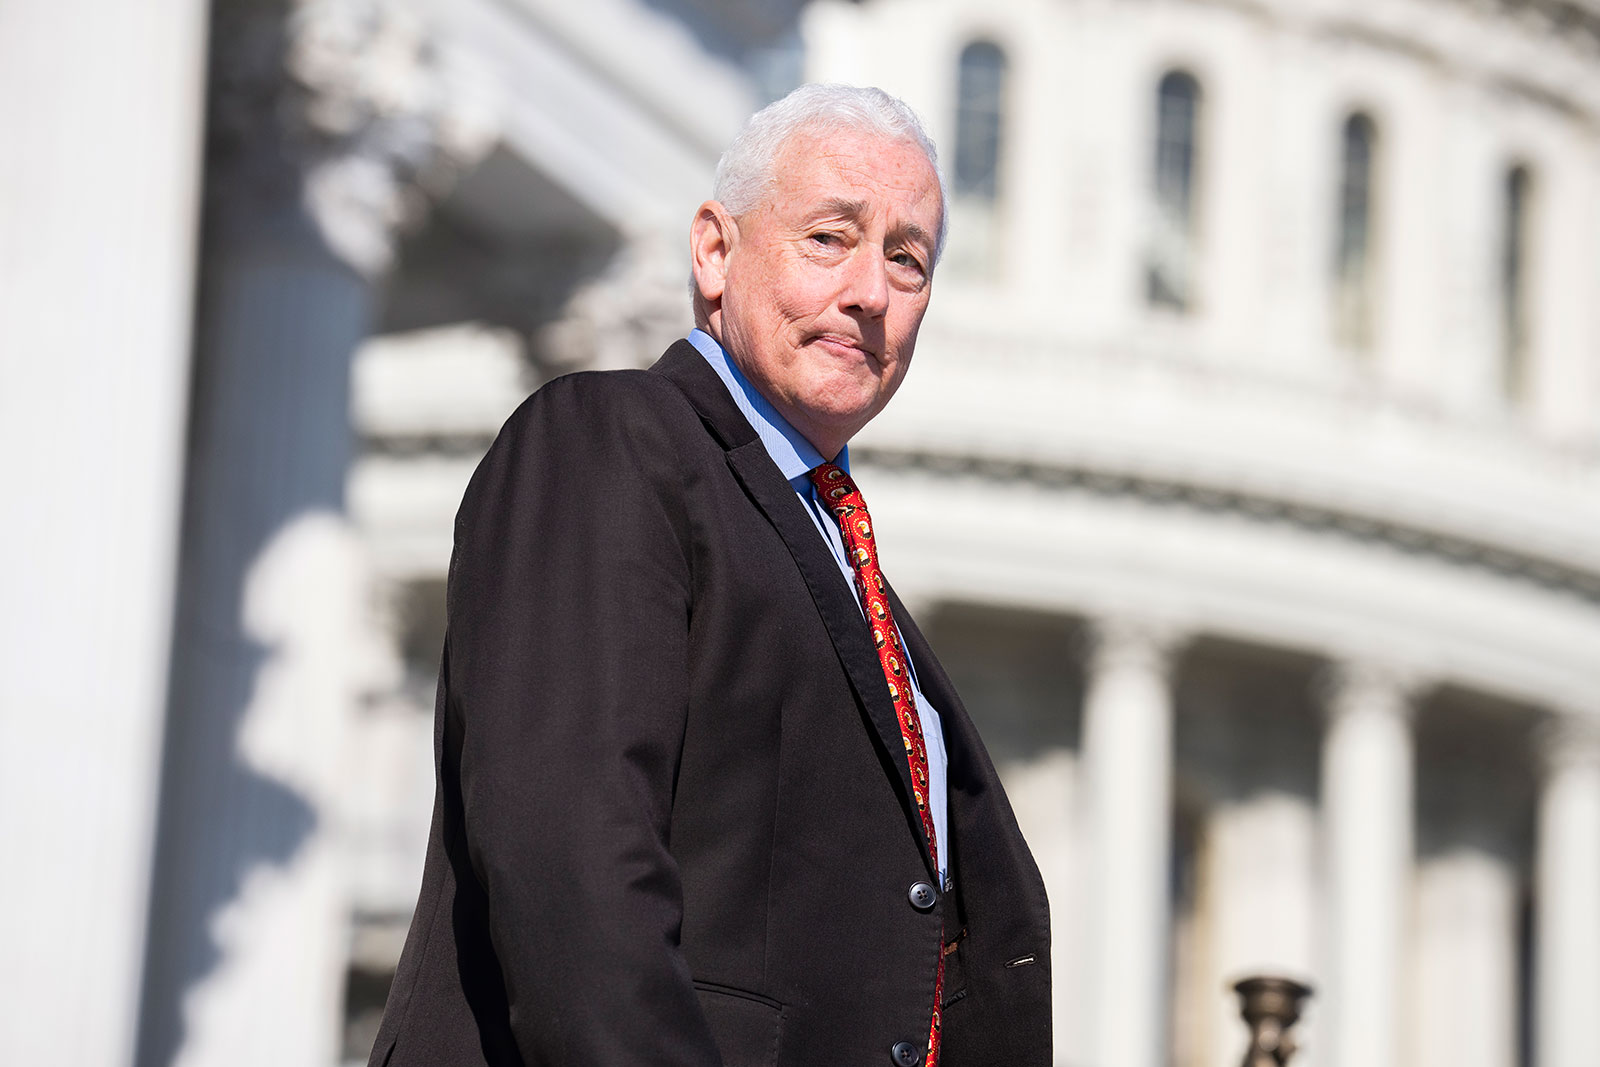 Indiana Rep. Greg Pence talks with reporters on the steps of the US Capitol during a vote on February 9. 